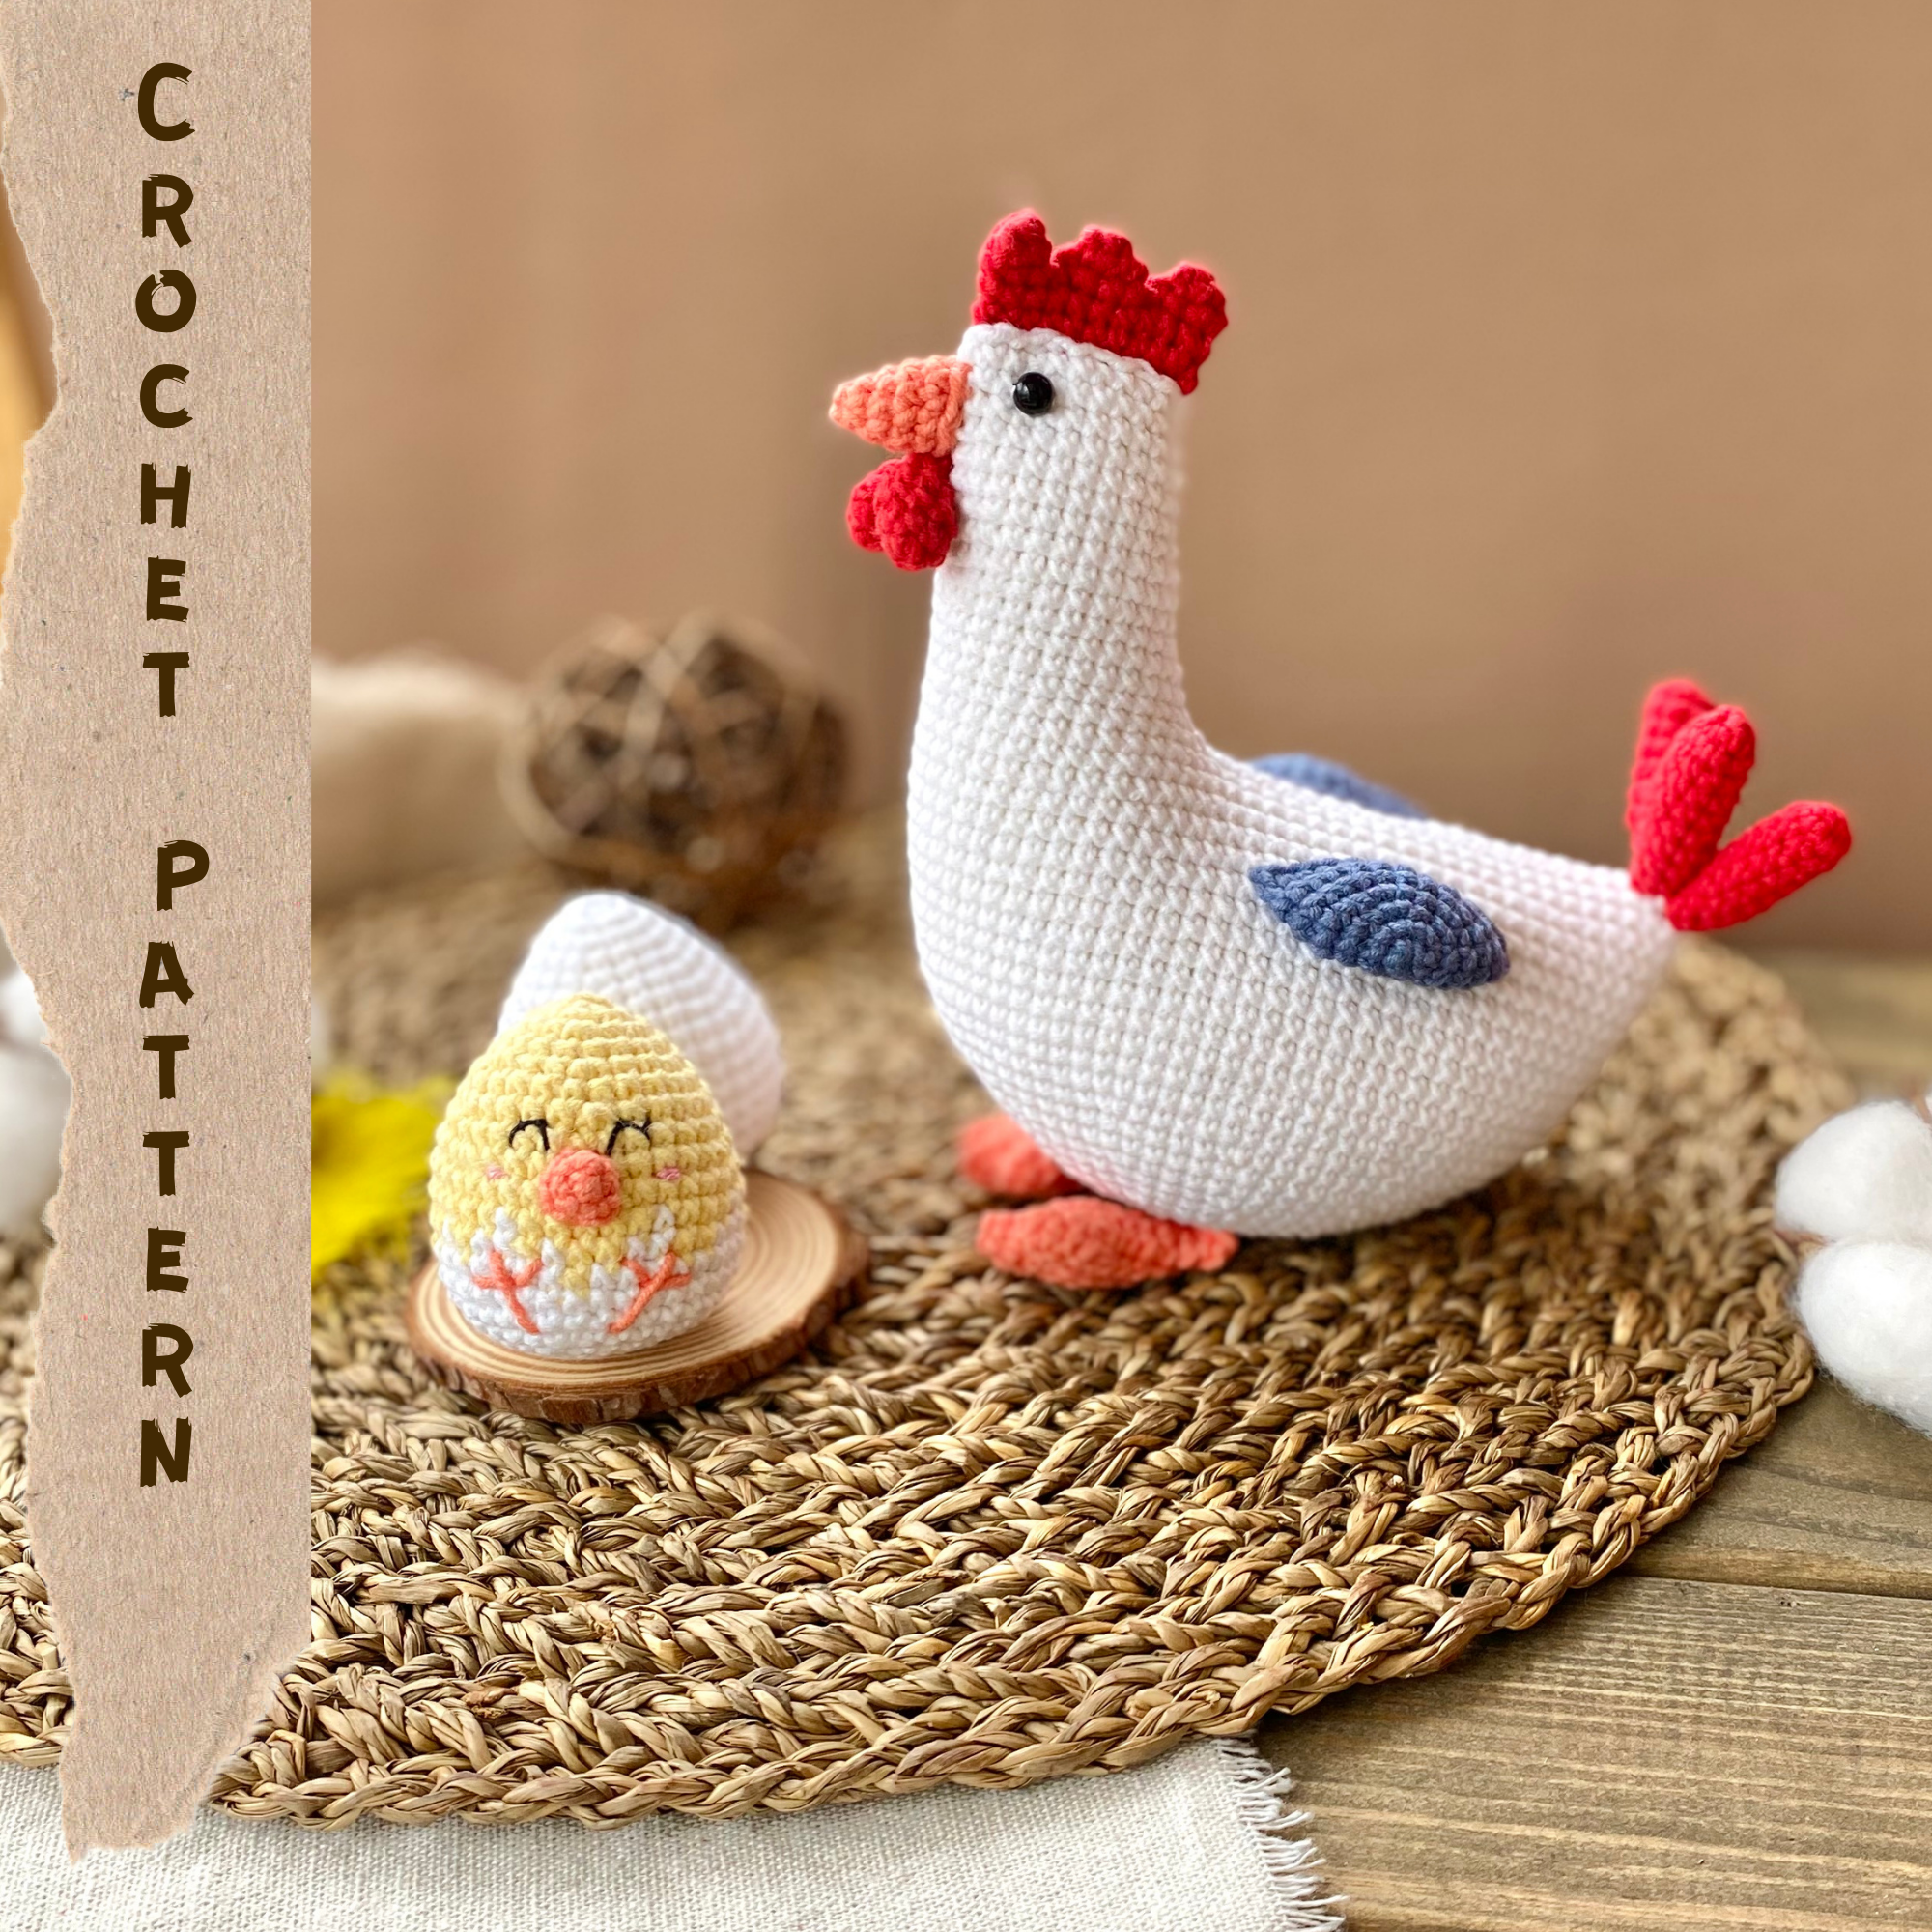 Looking for this hen doily egg holder pattern : r/crochetpatterns